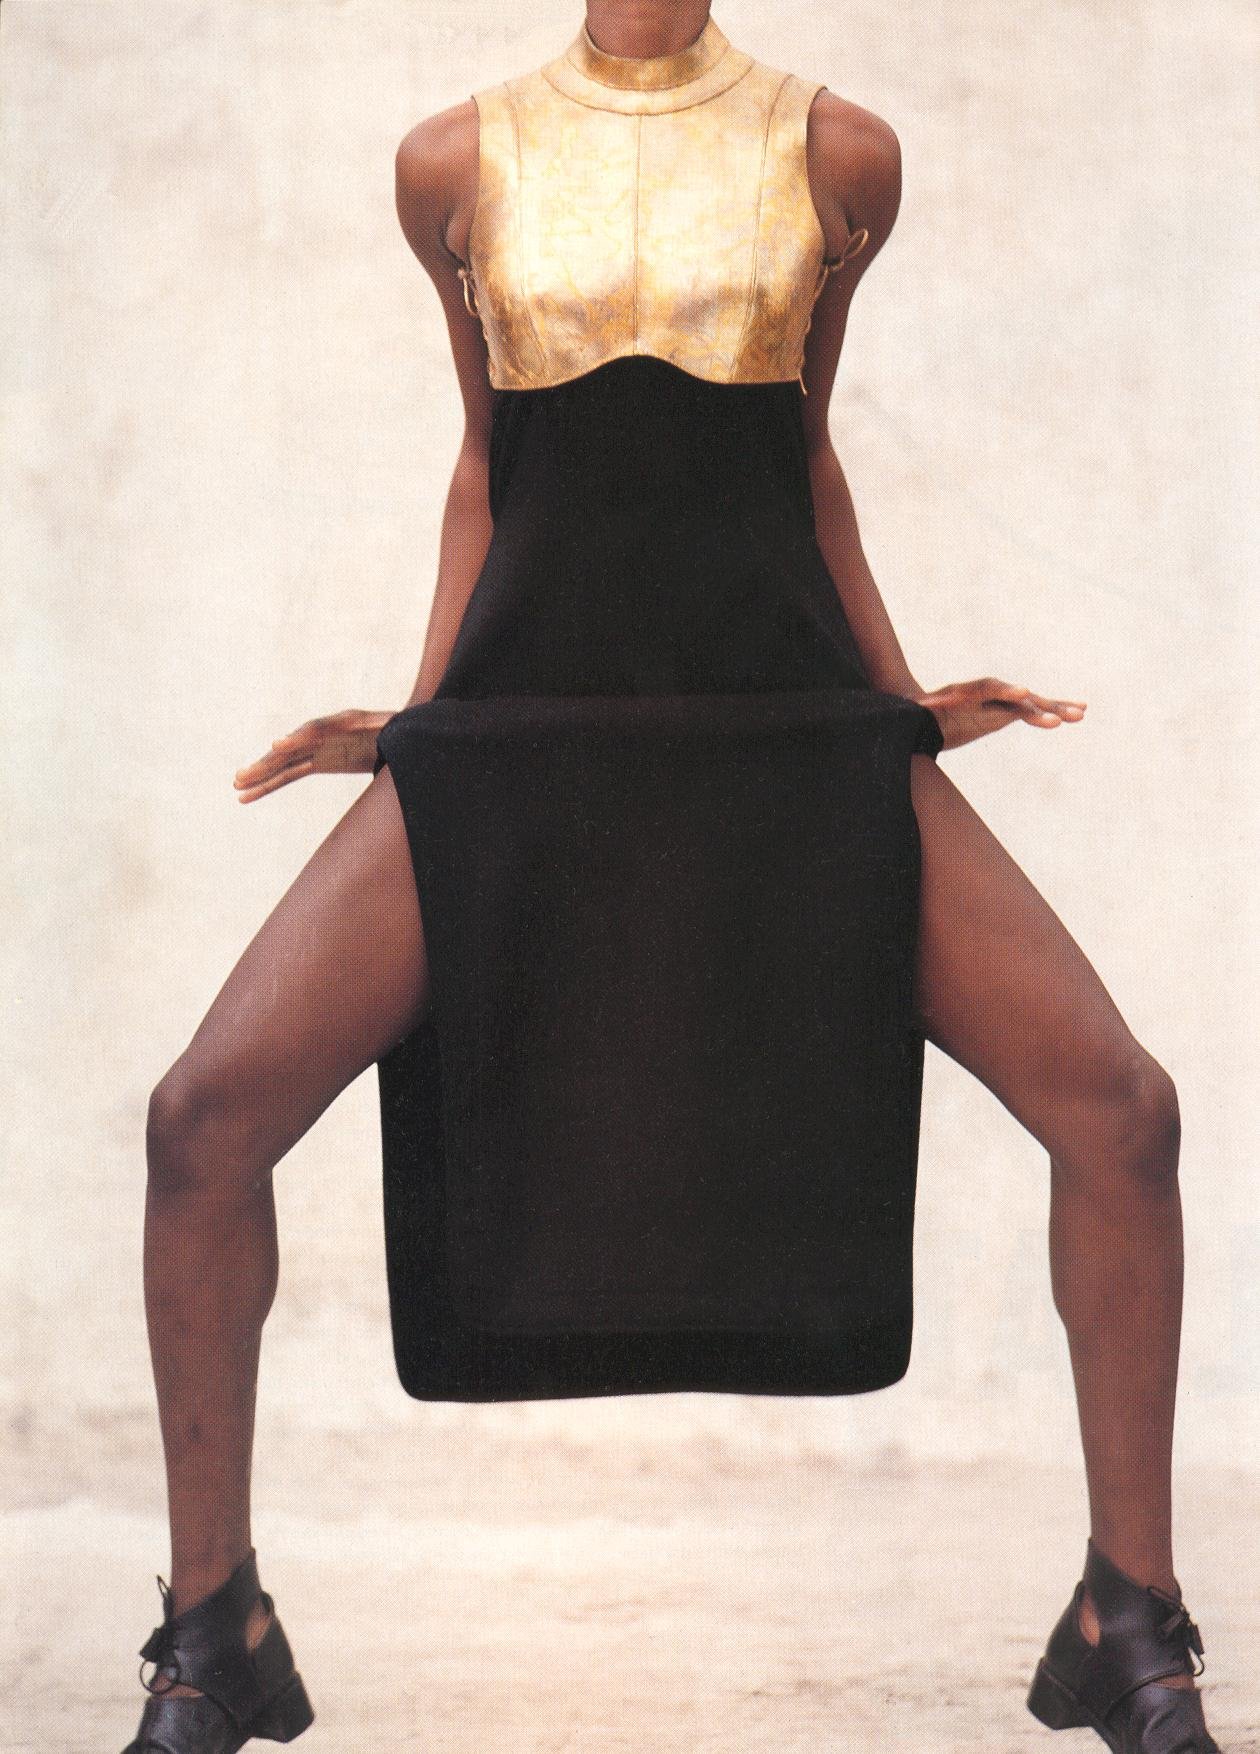 whitaker-malem-fashion-the-face-magazine-formed-leather-gold-jersey-dress.jpg